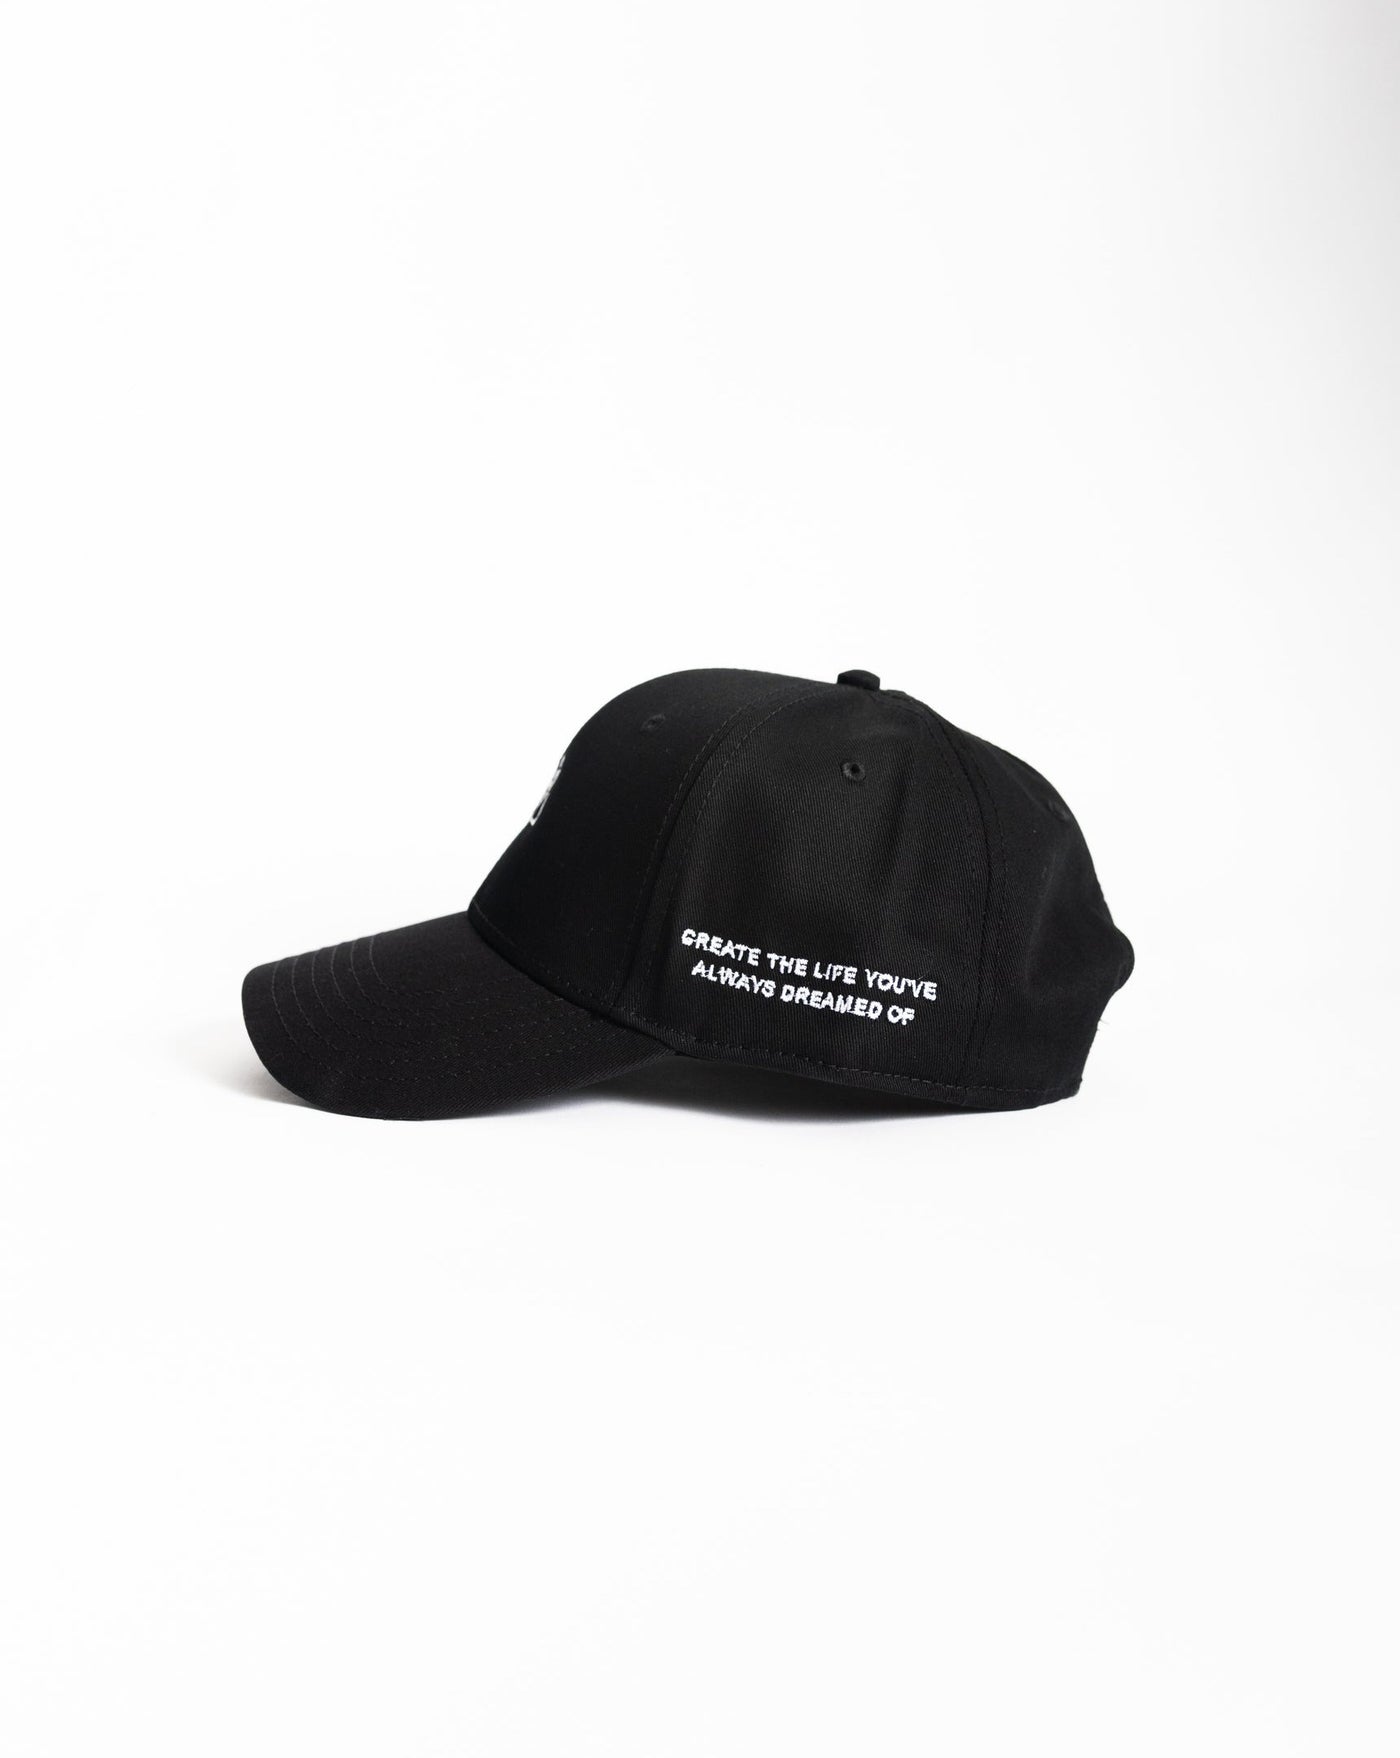 Create The Life You've Always Dreamed Of Hat